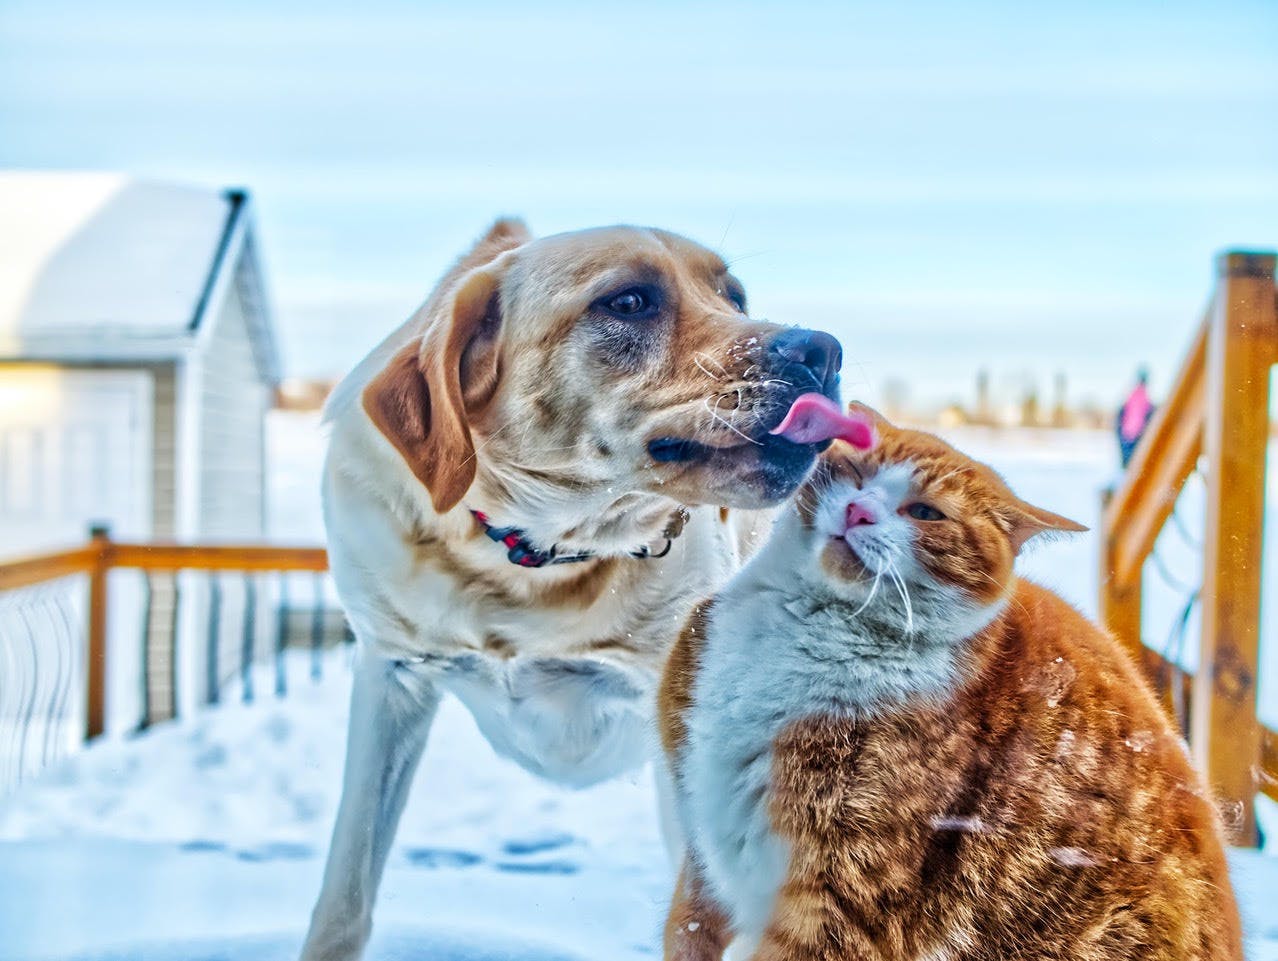 Dog licking a cat's face